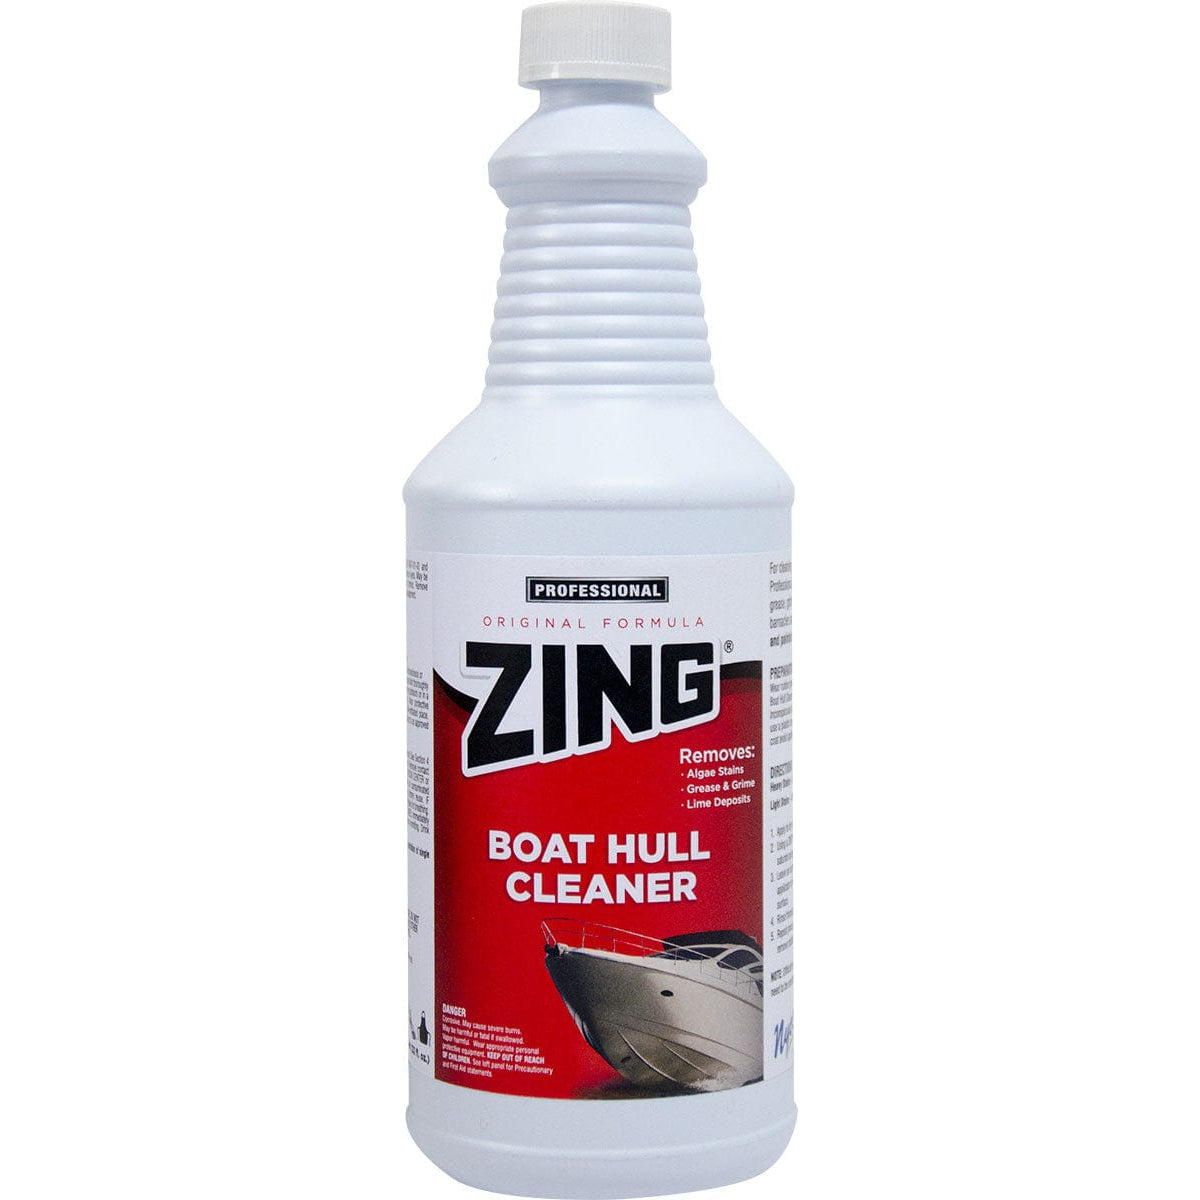 Zing Qualifies for Free Shipping Zing Professional Boat Hull Cleaner Quart #10007